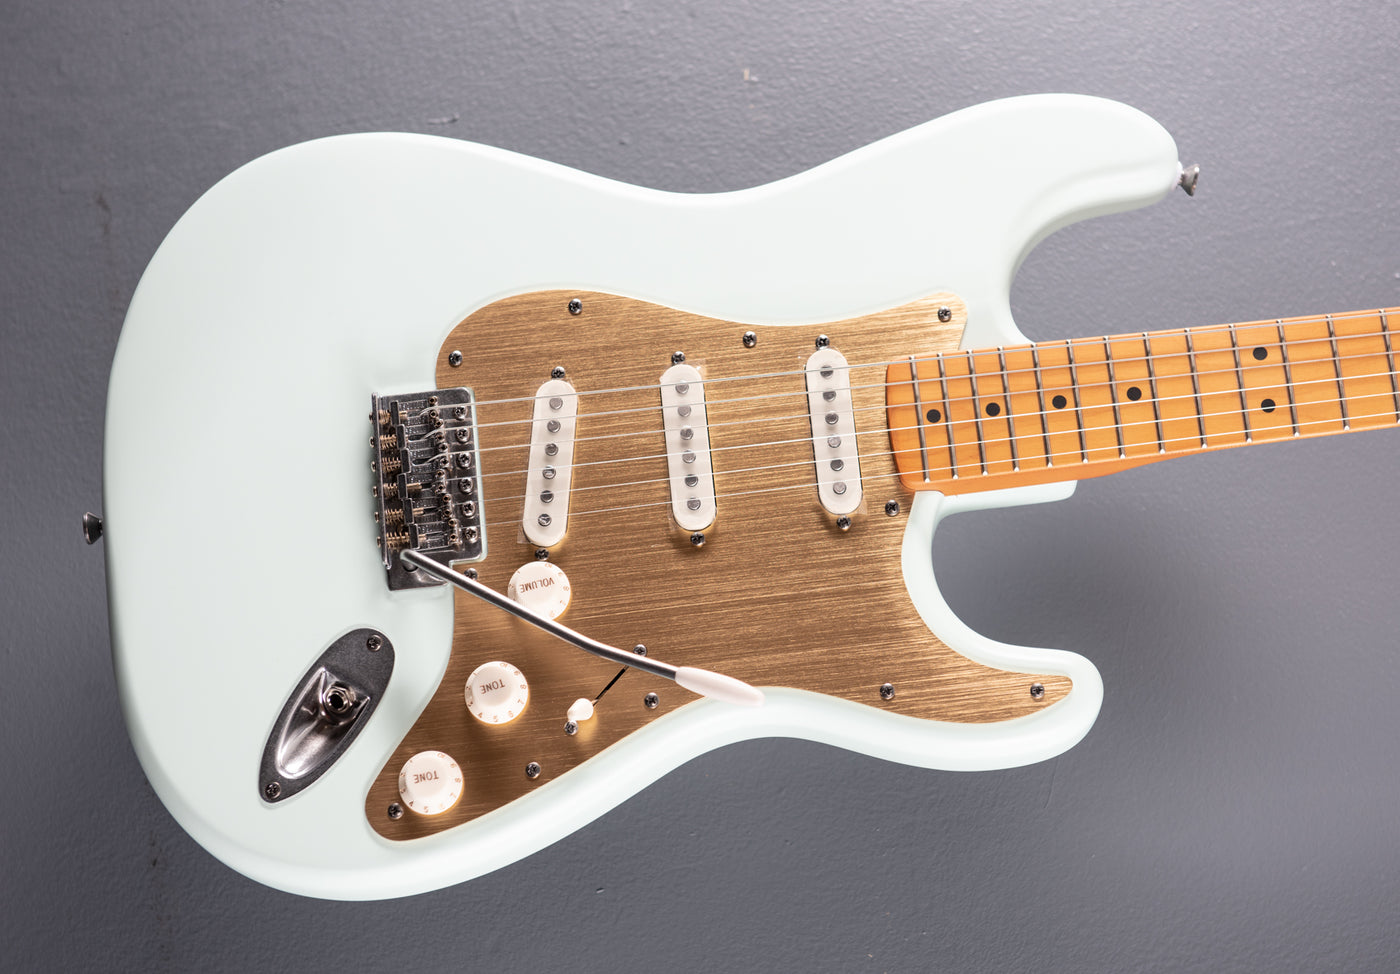 40th Anniversary Stratocaster Vintage Edition - Satin Sonic Blue